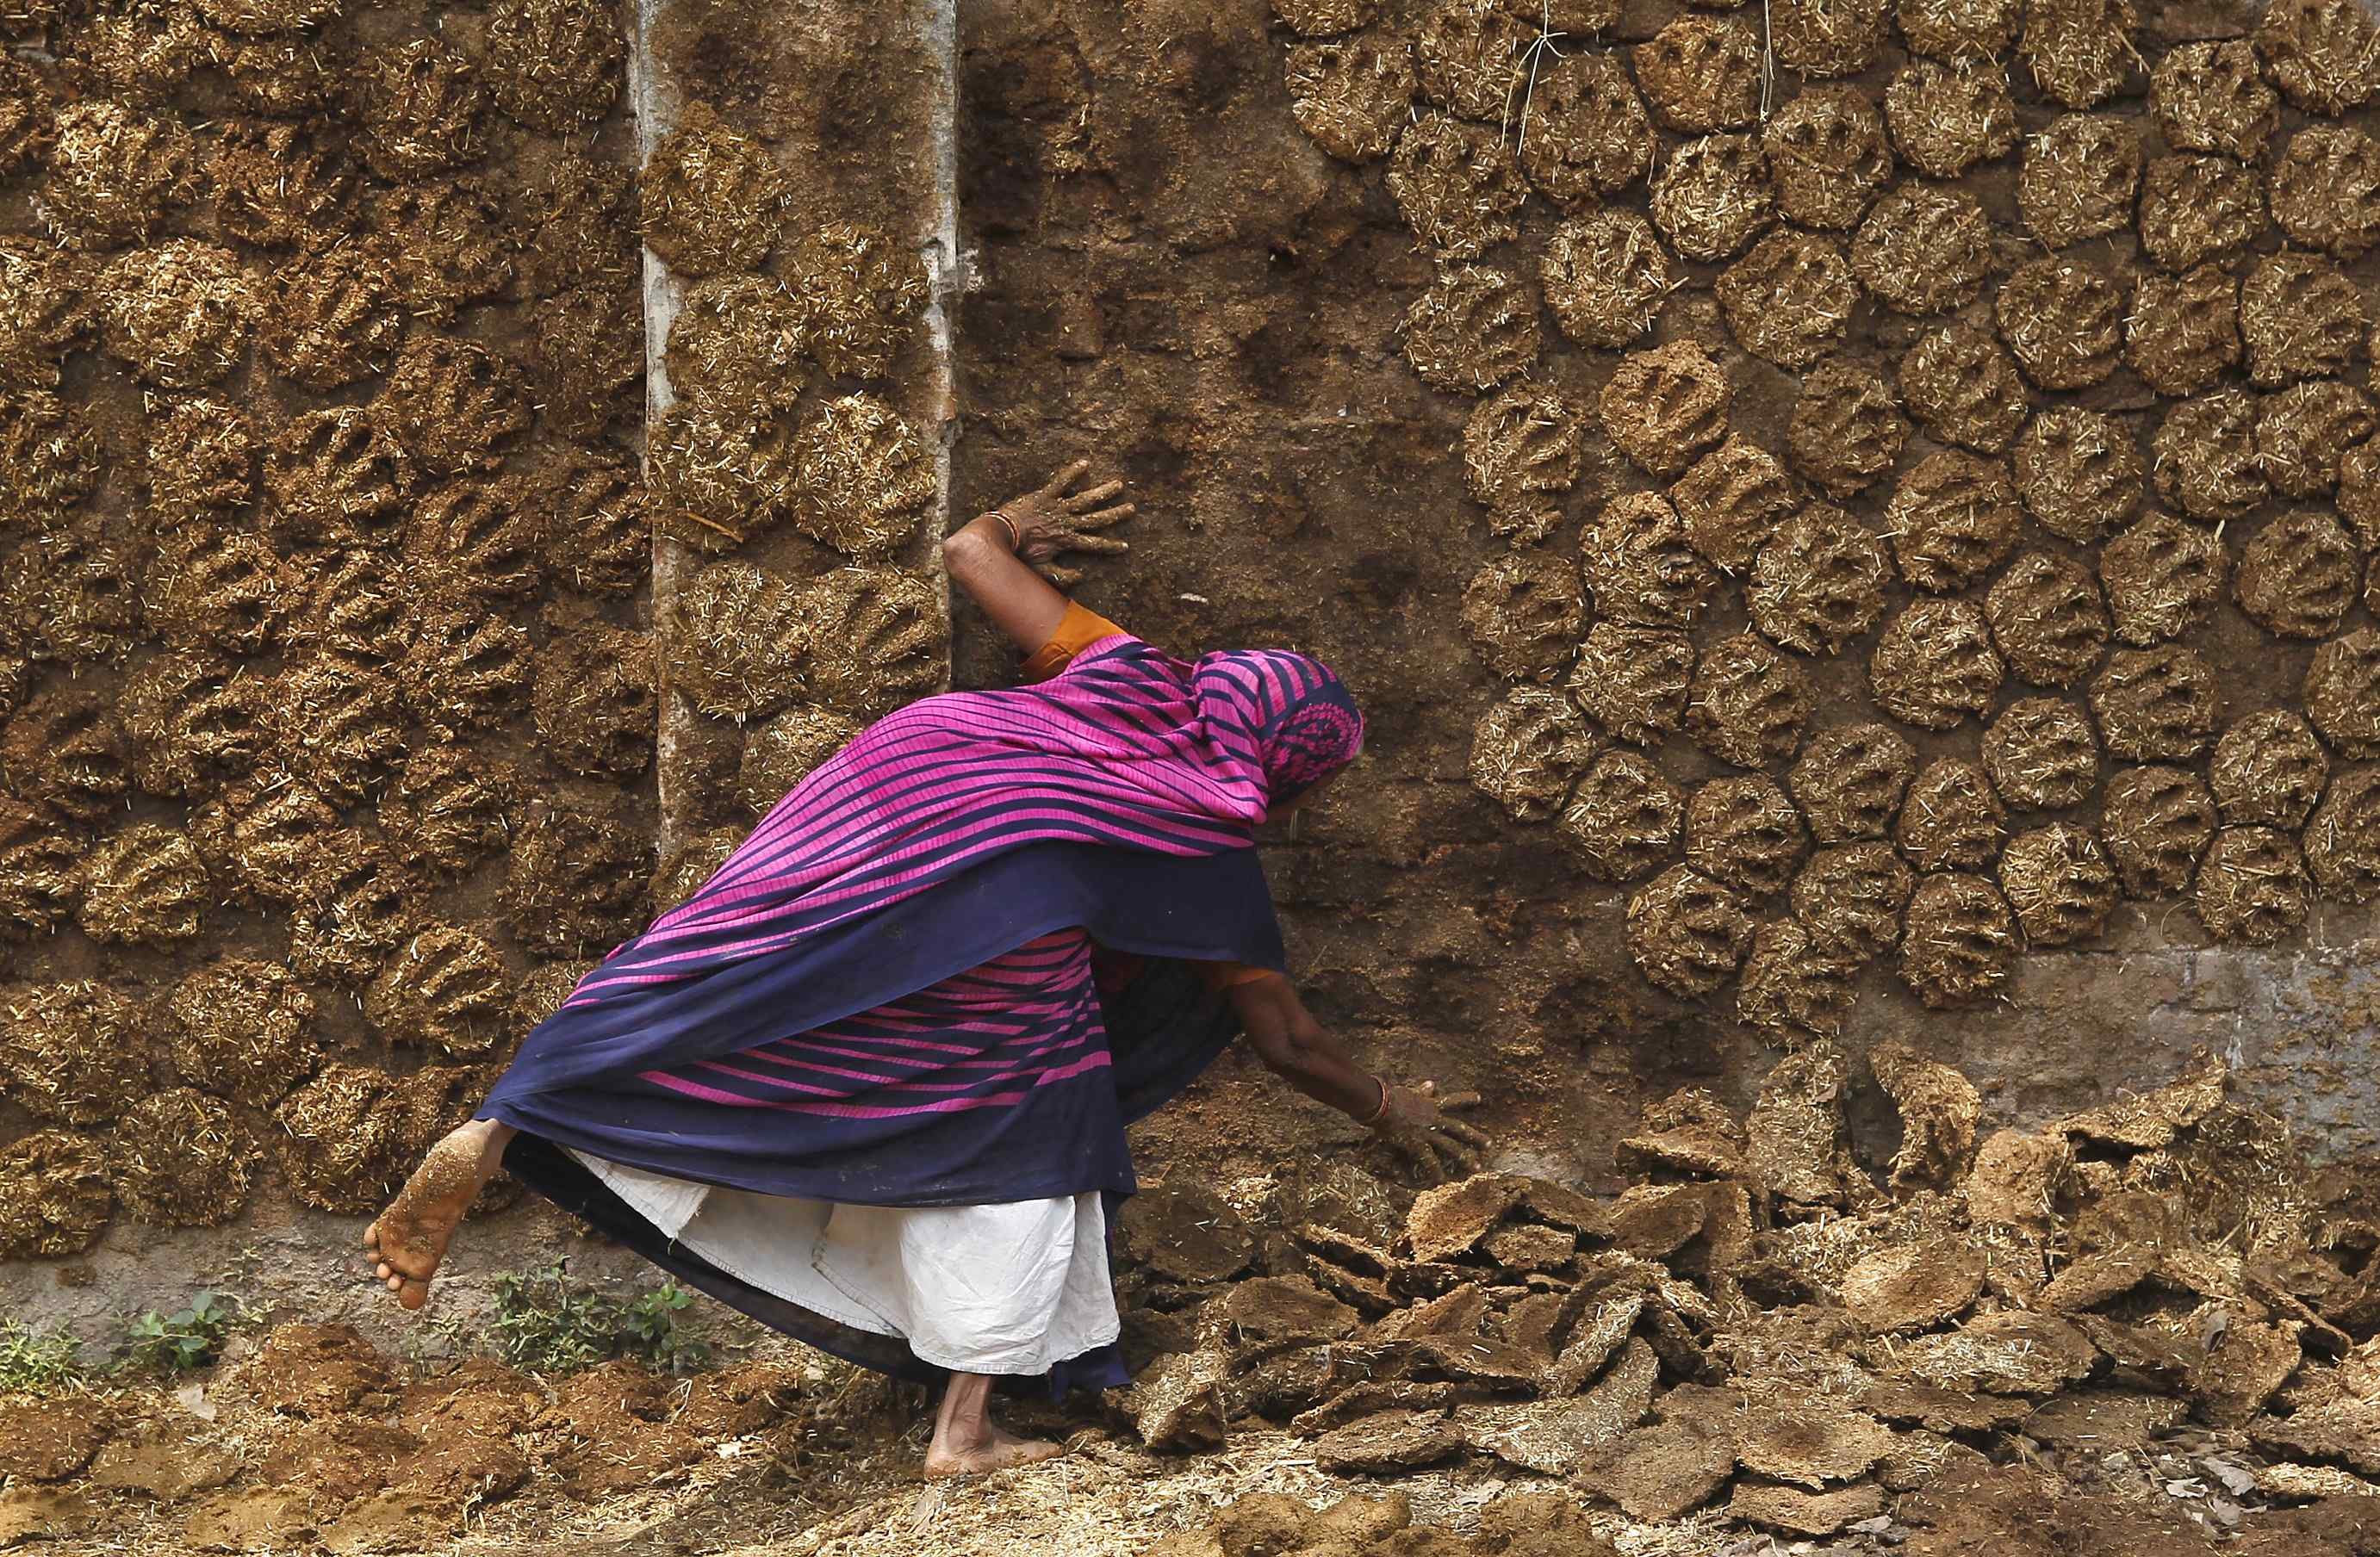 Apr. 16, 2014. A woman pastes cow dung cakes on a wall for drying in the northern Indian city of Allahabad.